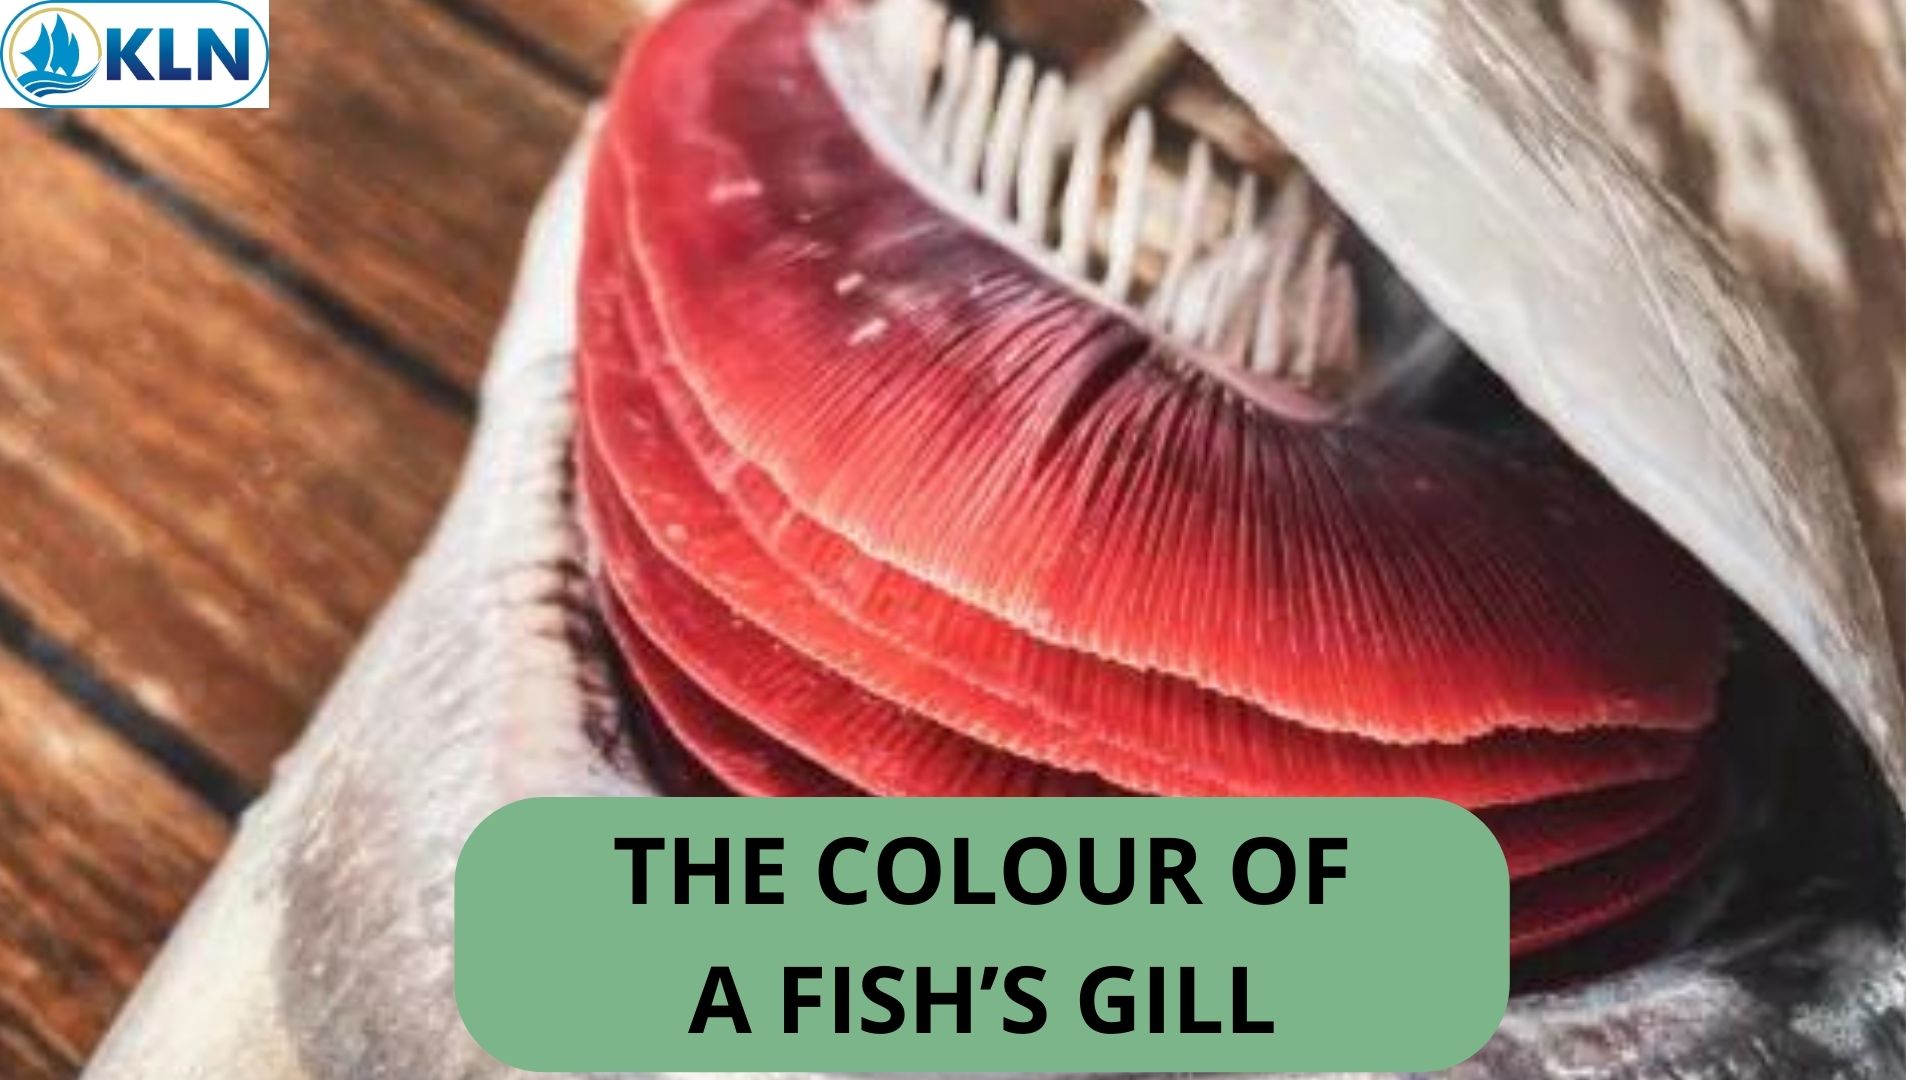 THE COLOUR OF A FISH’S GILLS